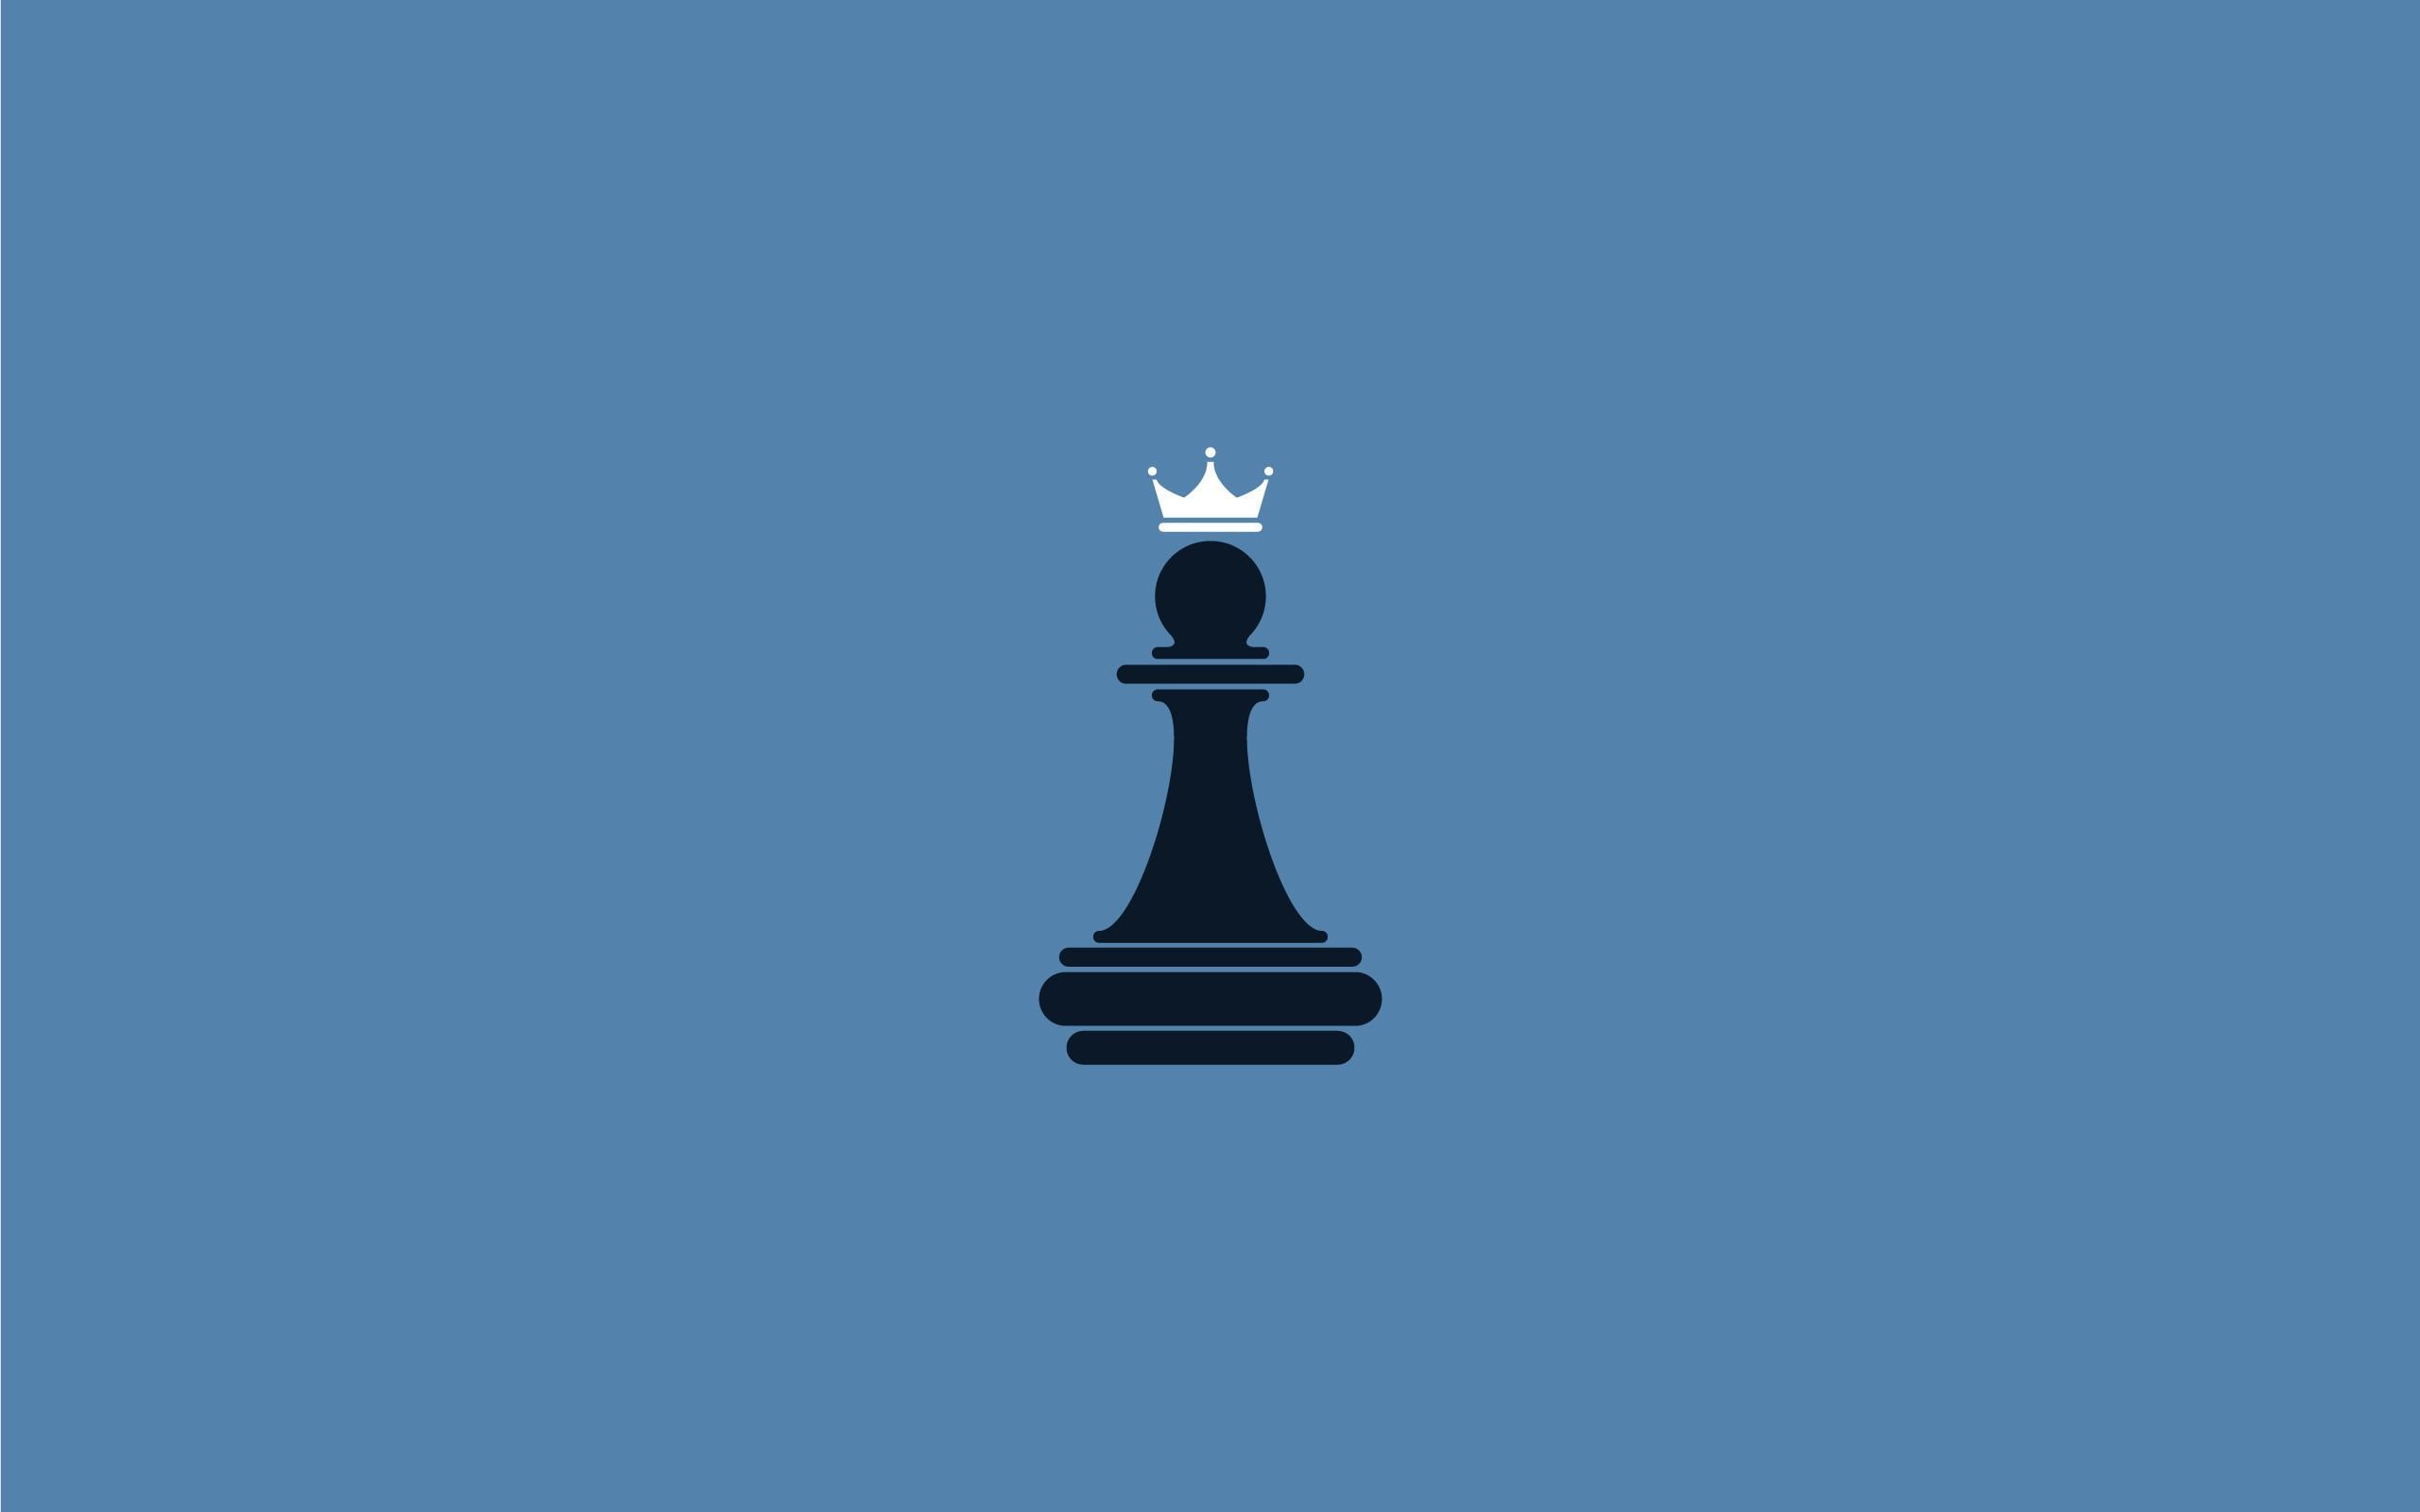 pawn to queen